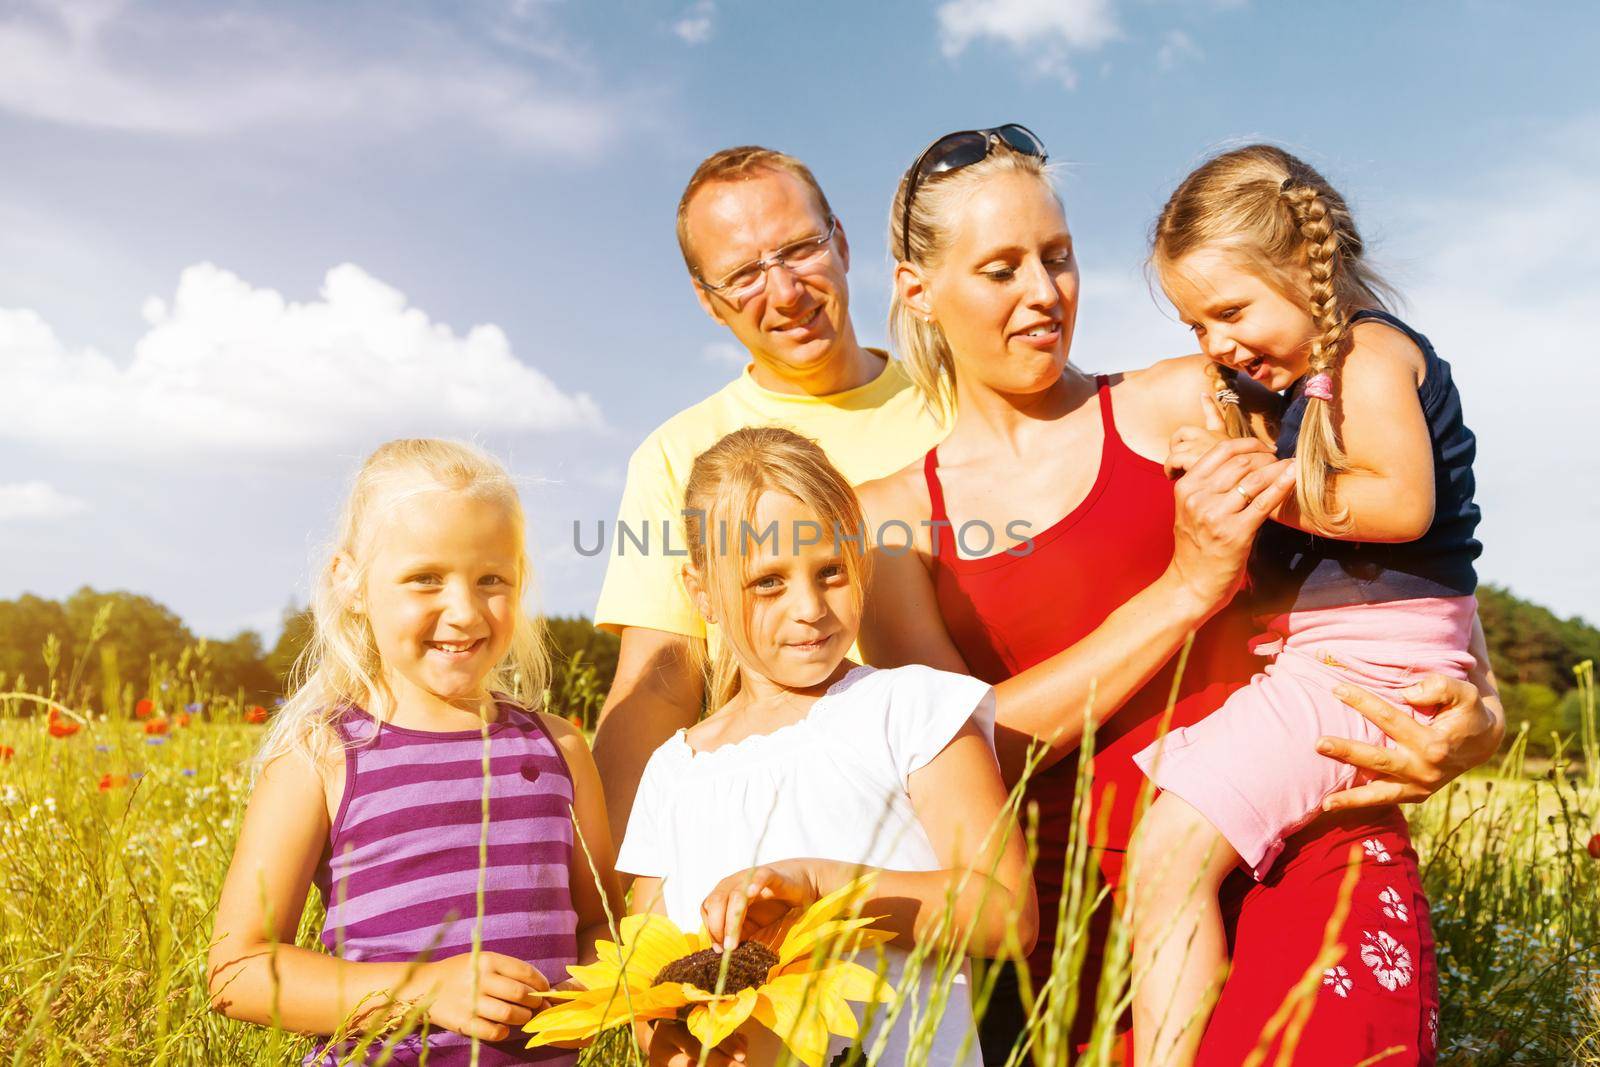 Happy family with tree kids standing in a field of wild flowers together